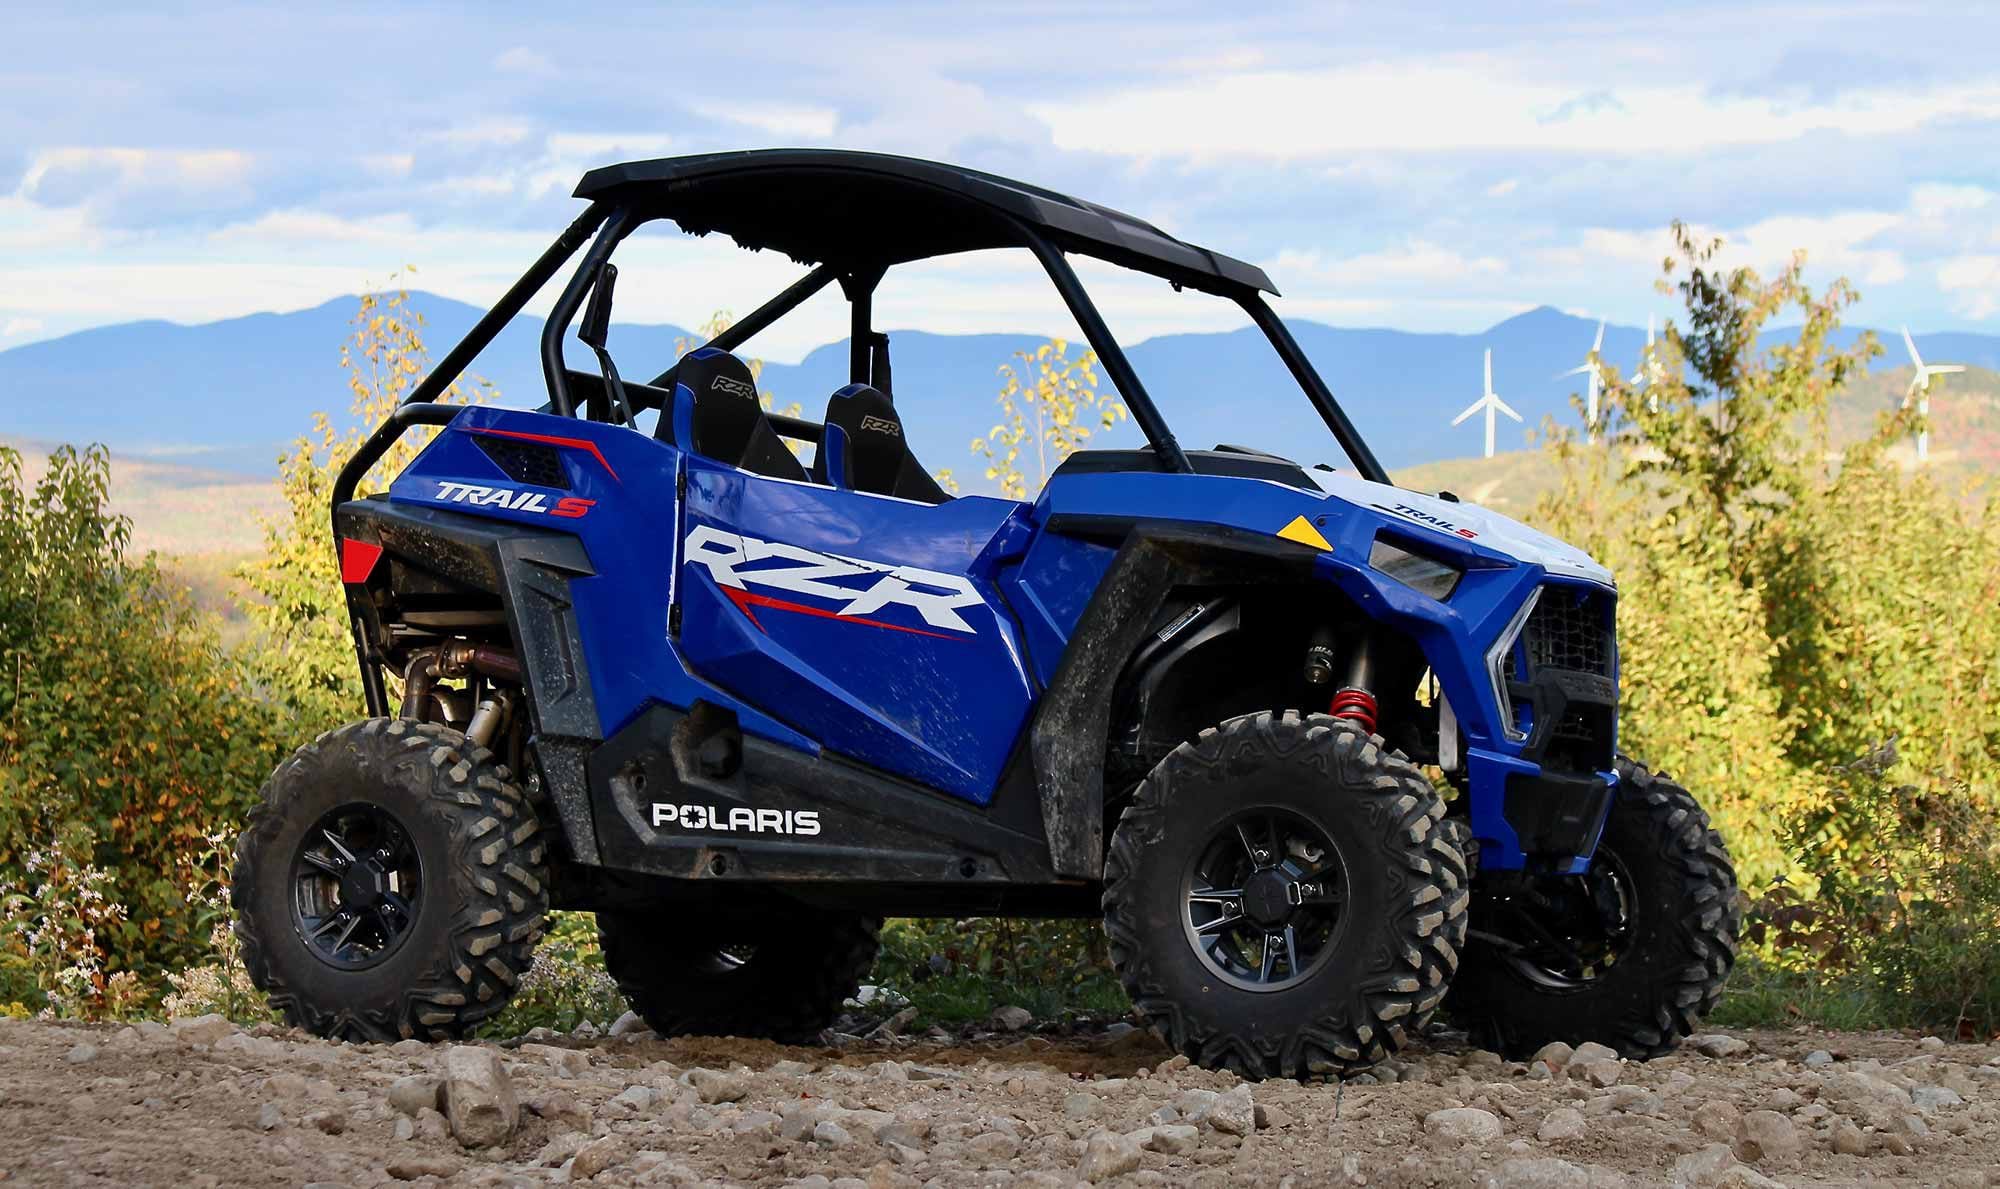 The 2021 RZR Trail S 1000 Premium shares its roots with earlier Polaris UTVs but is a much more refined machine.